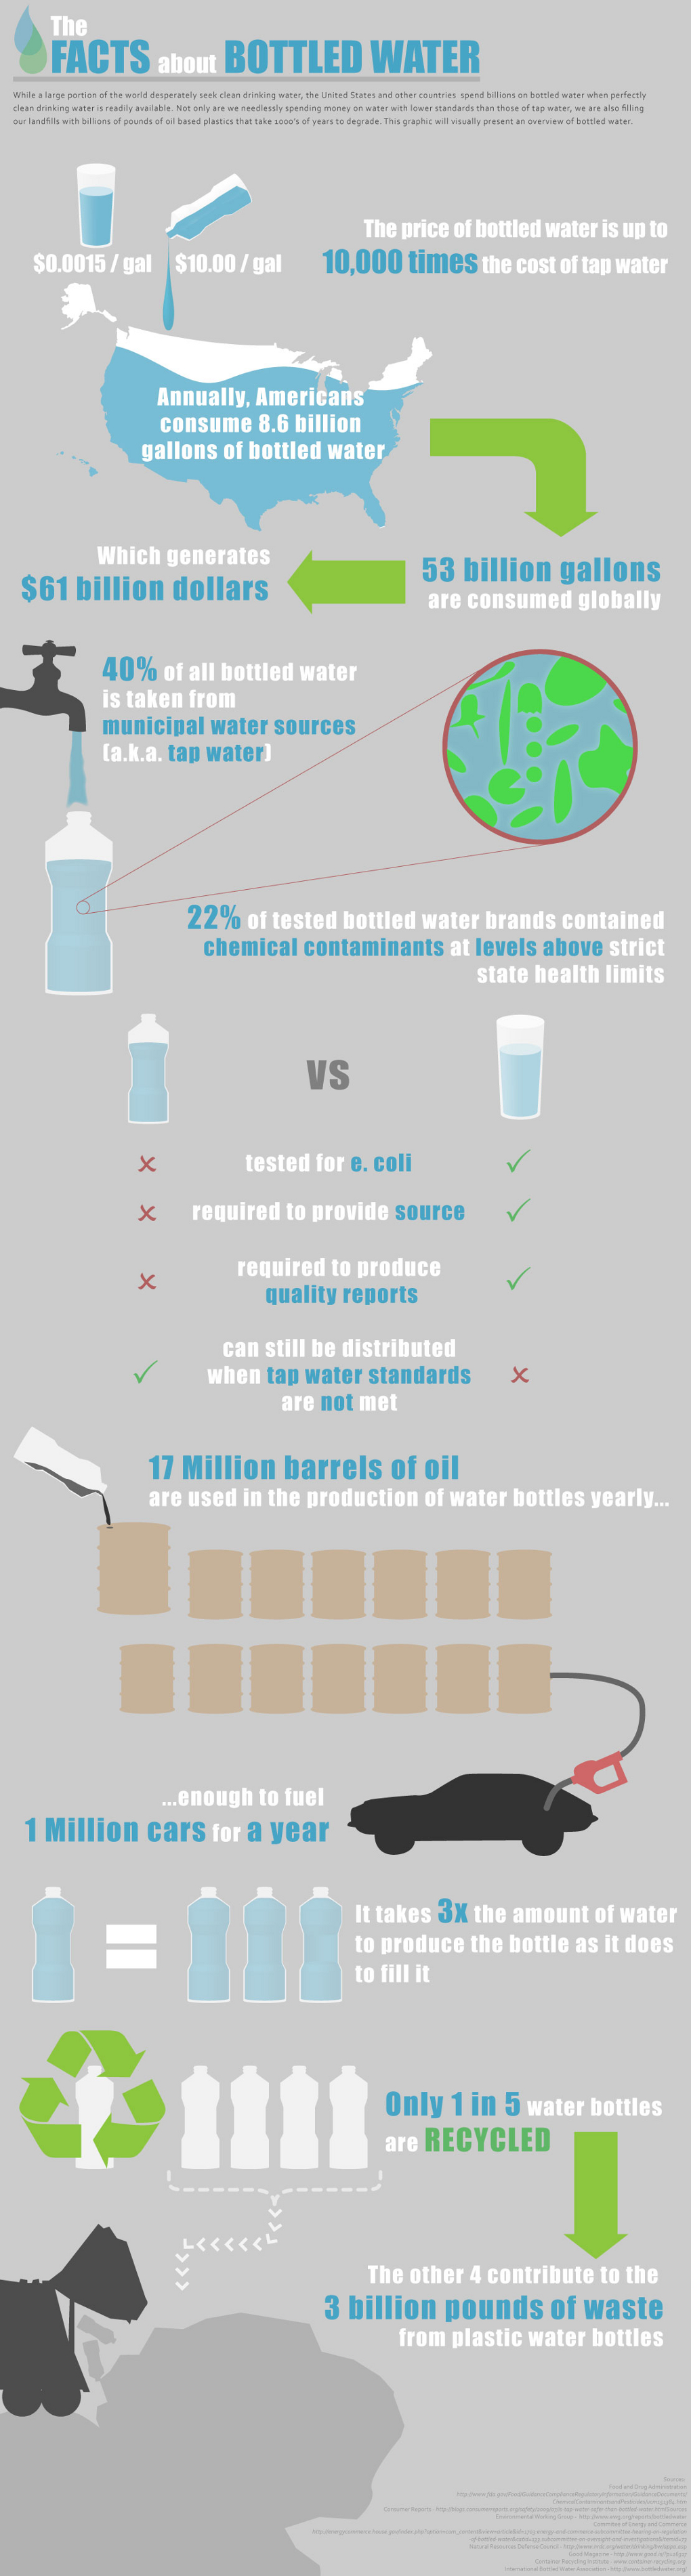 Facts About Bottled Water